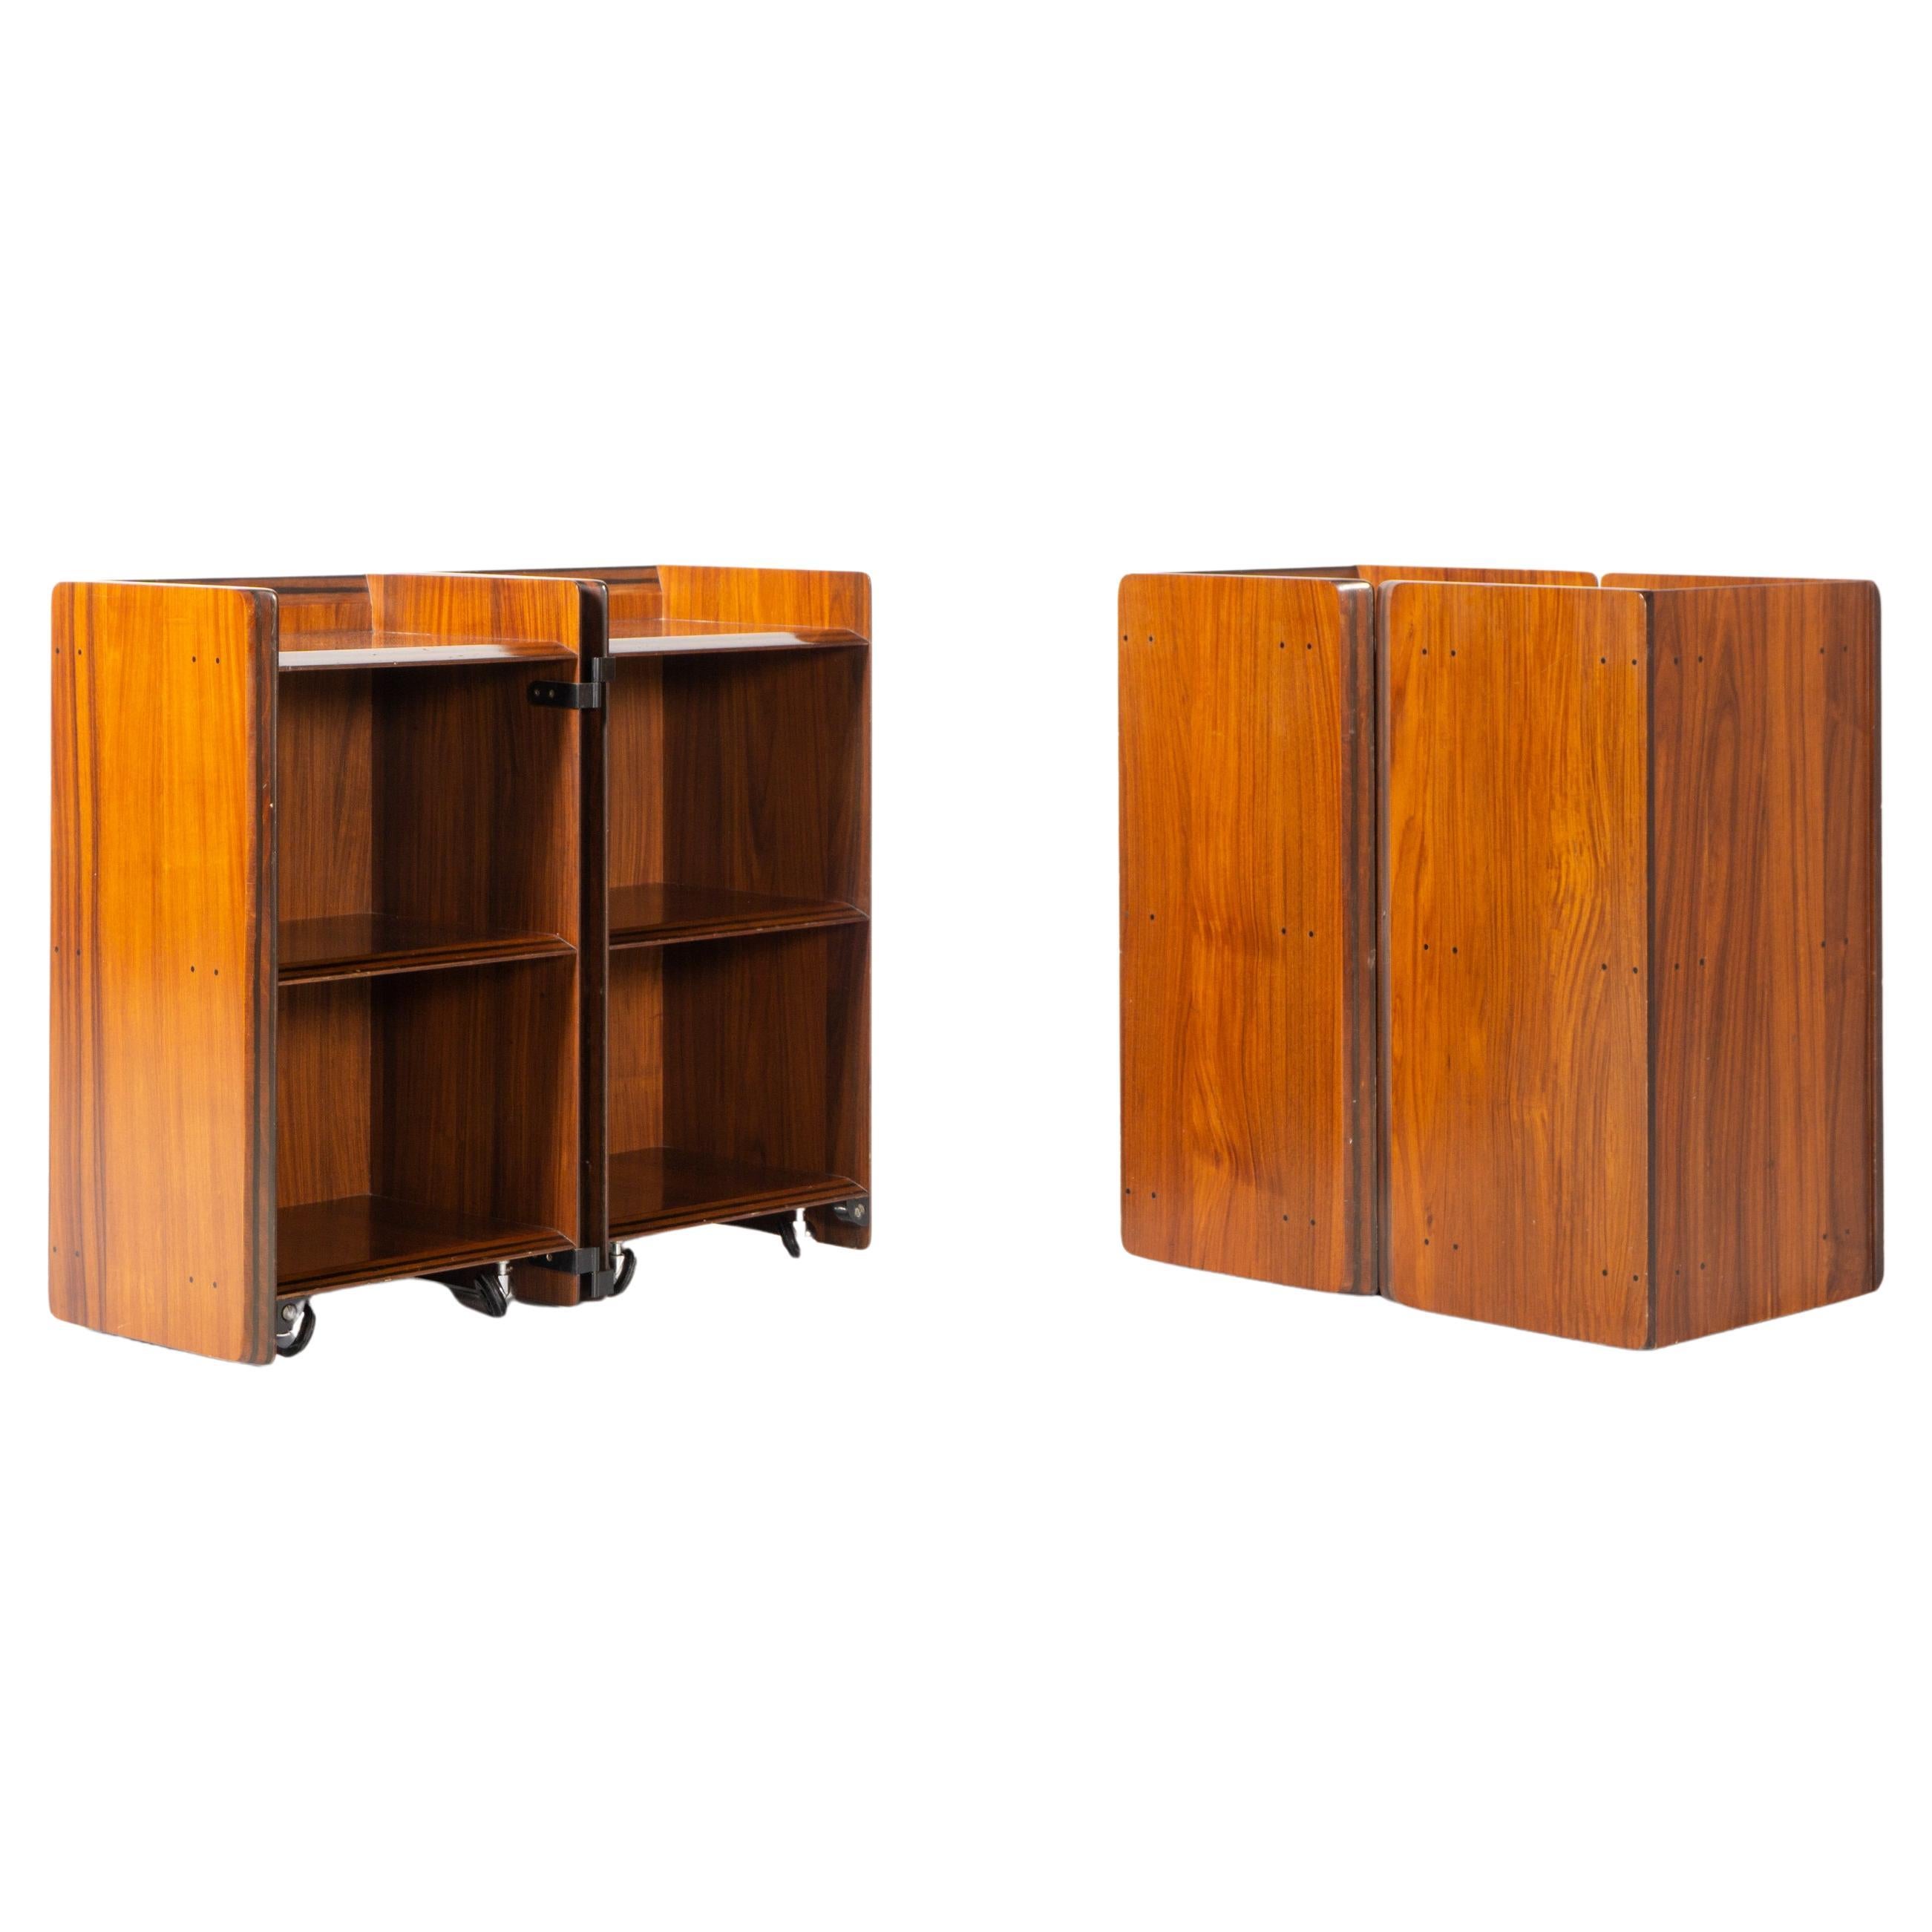 Two Cabinets on Rollers, Model 'Artona' by Afra and Tobia Scarpa, 1975 For Sale